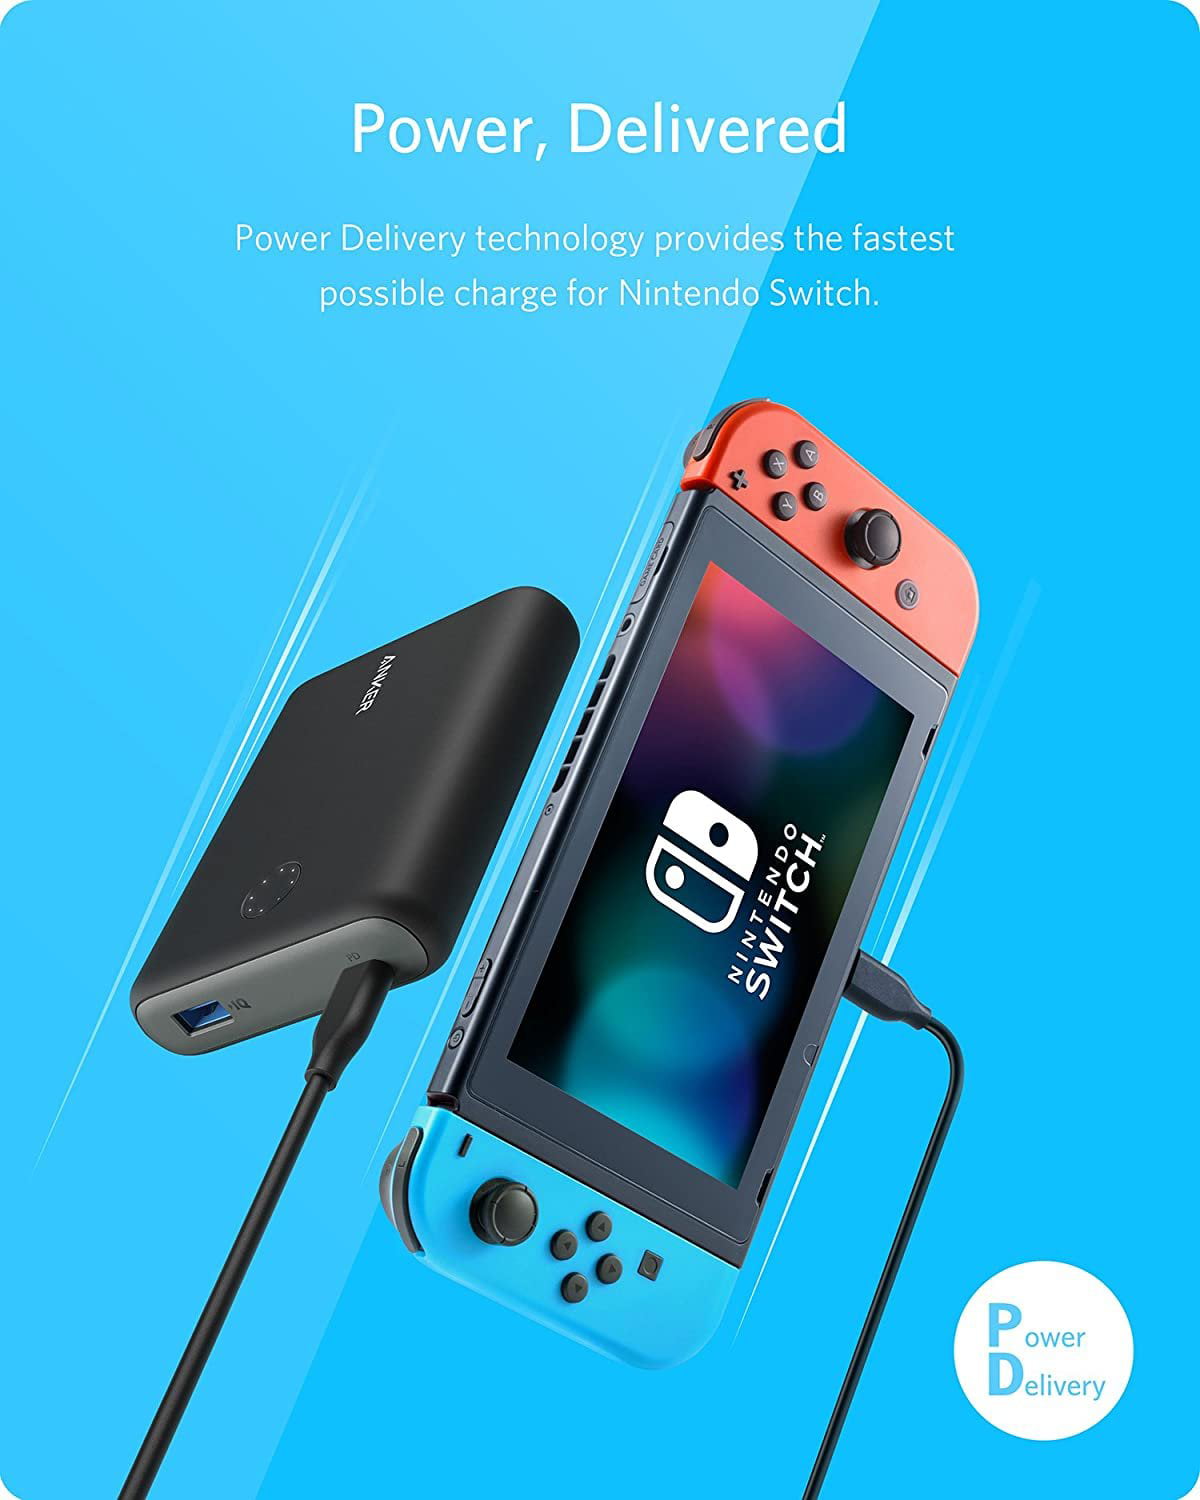 Power Delivery] Anker PowerCore 13400 Nintendo Switch The Official 13400mAh Portable Charger for Nintendo Switch, for use with iPhone X/8, USB-C MacBooks, and - Walmart.com